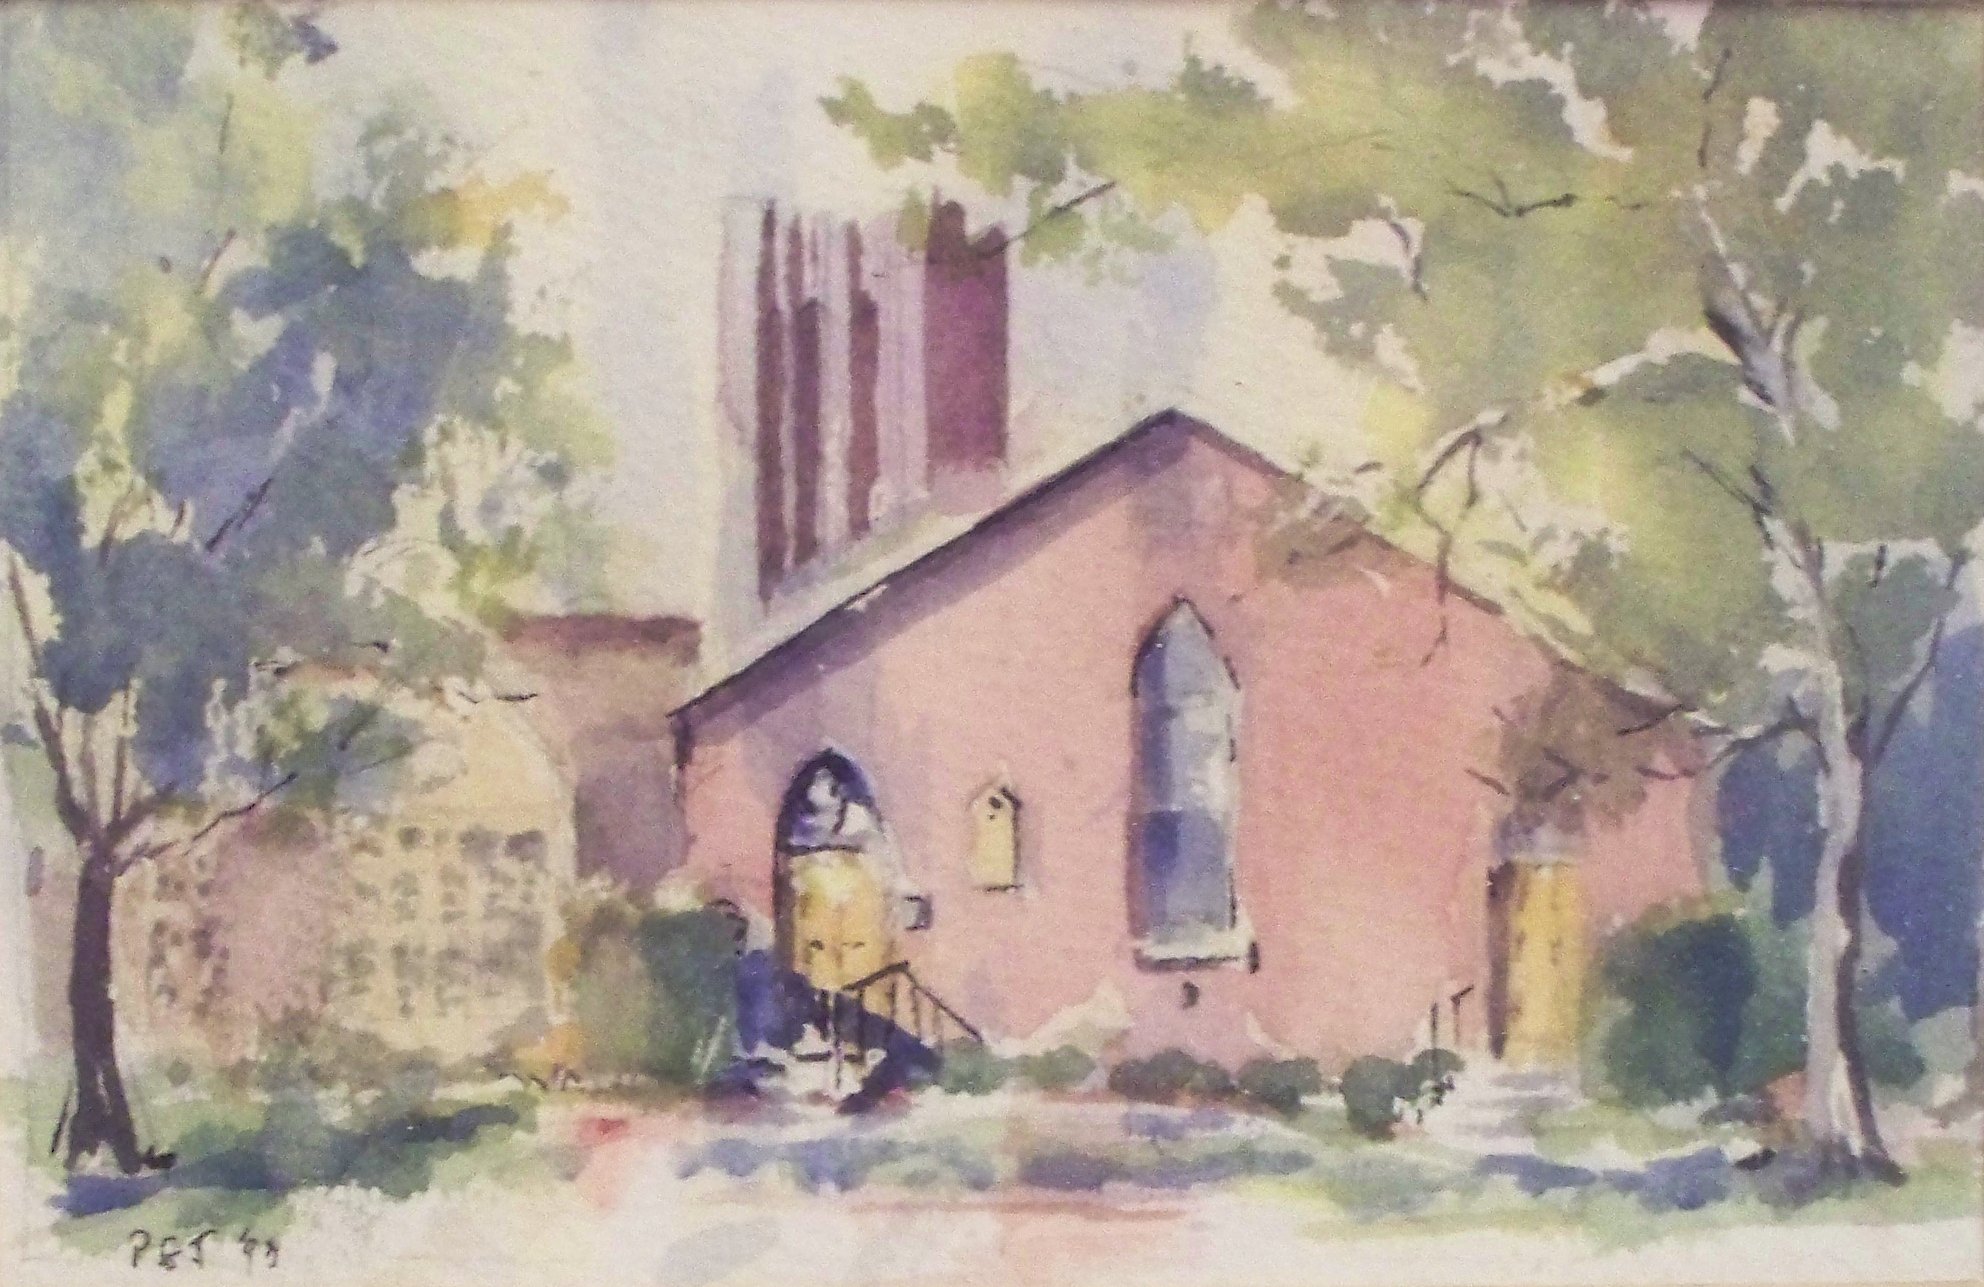 St. Paul's Episcopal Church Watercolor by Patricia Thomas, 1993